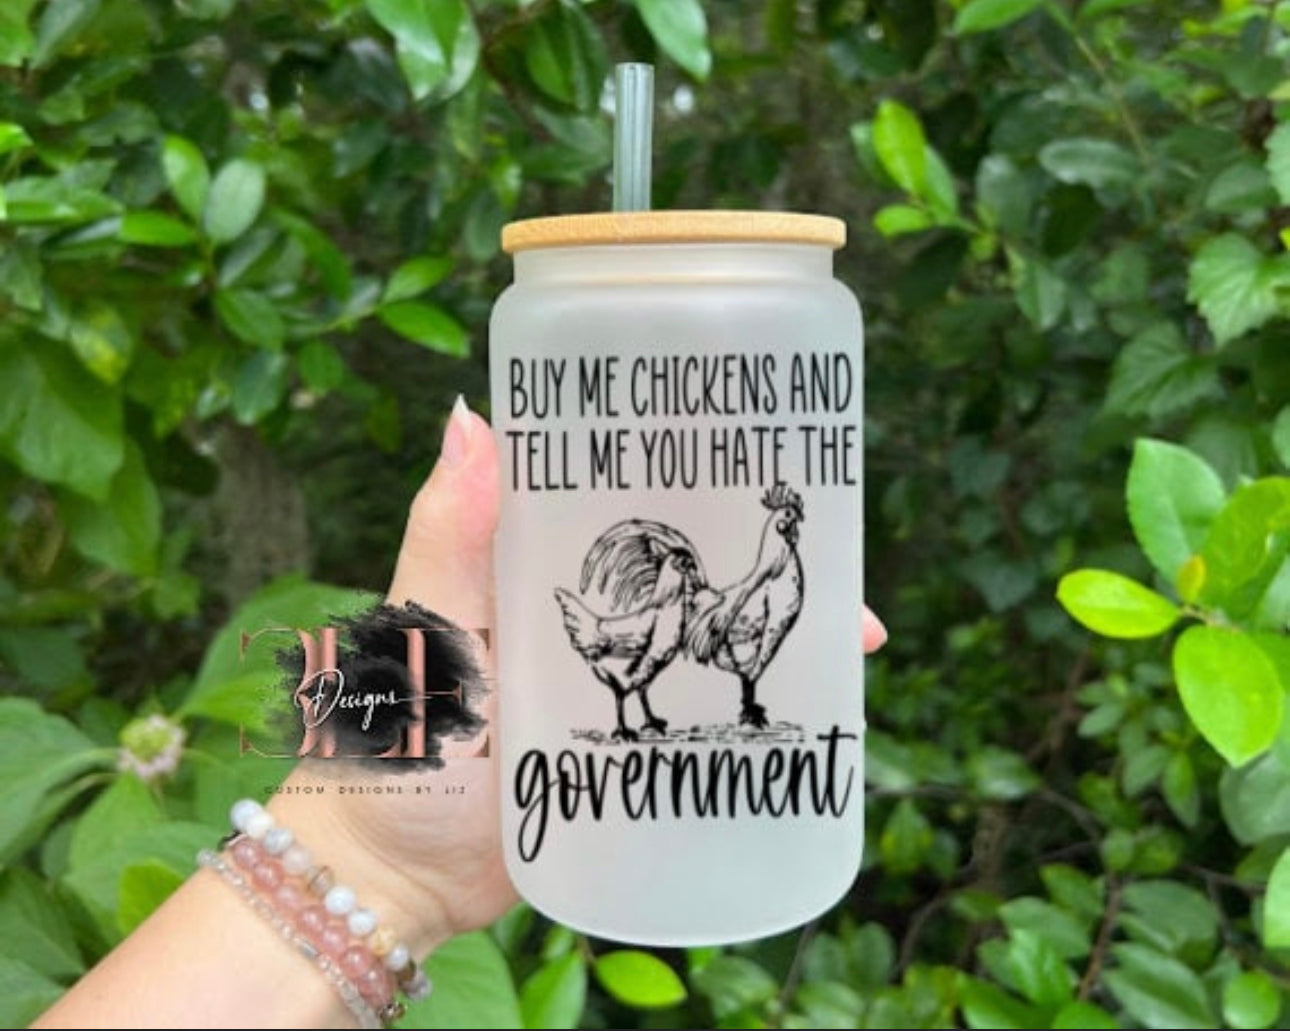 Buy Me Chickens and Tell Me You Hate the Government, Chicken Lover Cup, Glass Chicken Cup, Funny Glass Tumbler, Funny Chicken Glass Cup